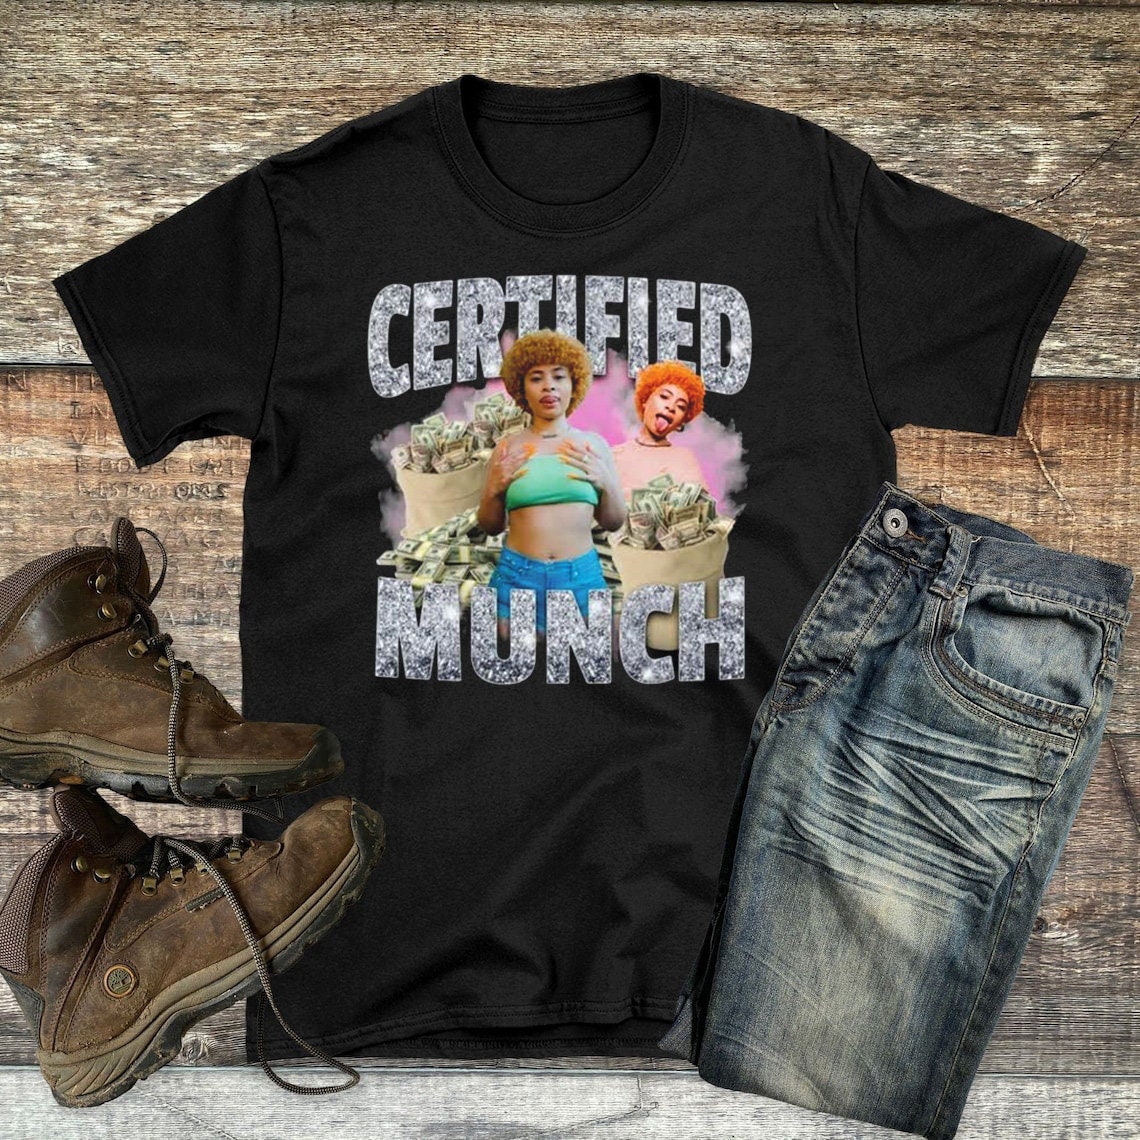 Certified Munch Ice.Spice Shirt, Vintage Ice.Spice Shirt, Ice.Spice Proud Munch graphic Tee shirt